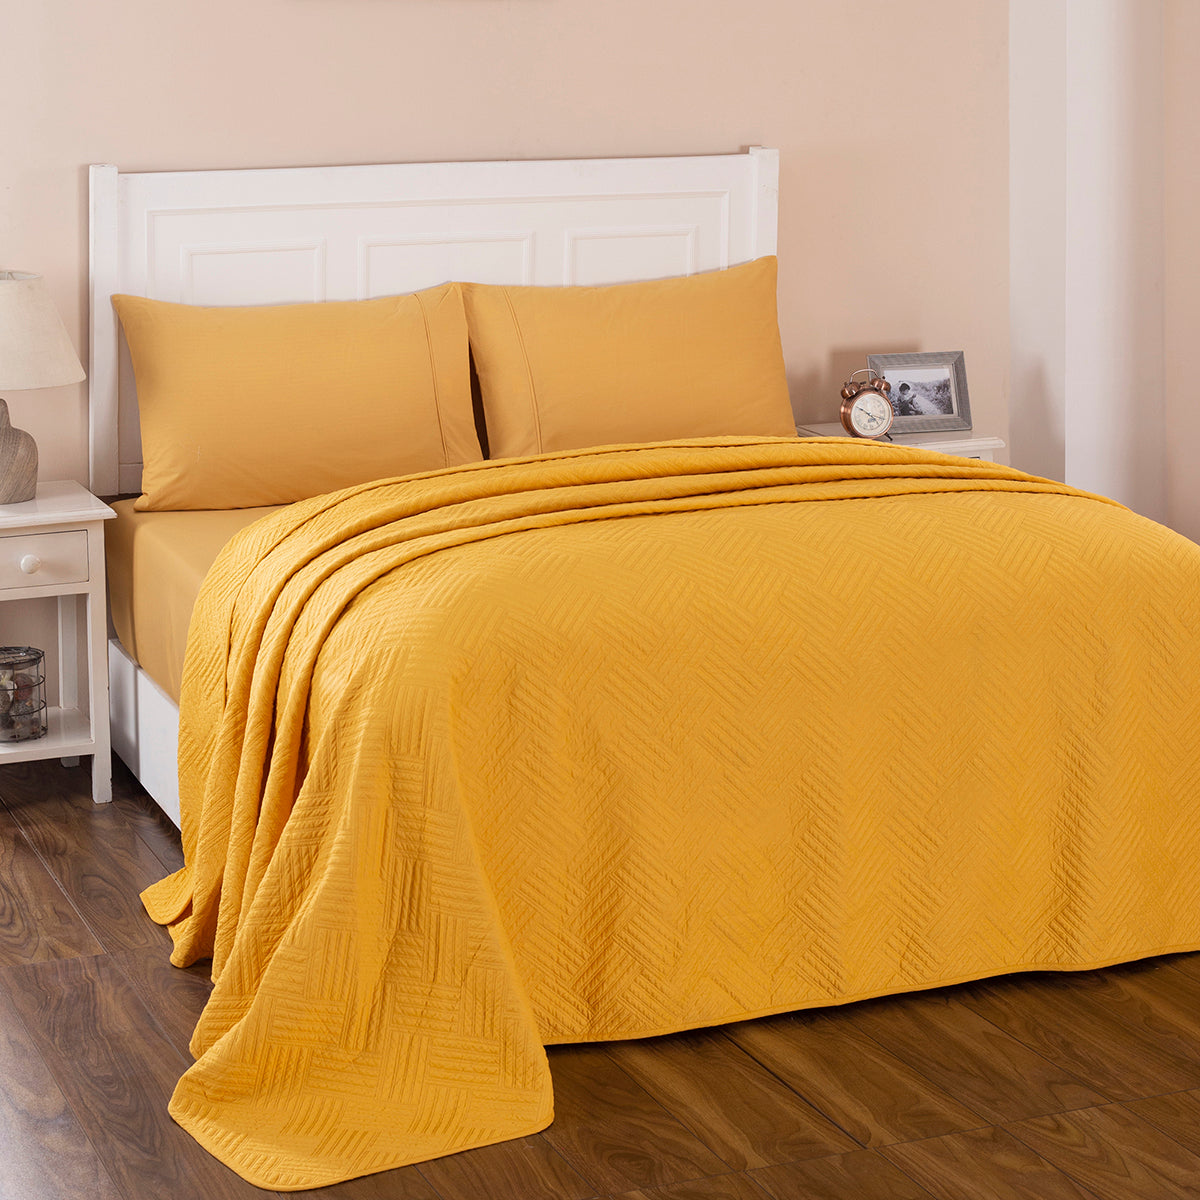 Eliott Summer AC Quilt/Quilted Bed Cover/Comforter Mustard